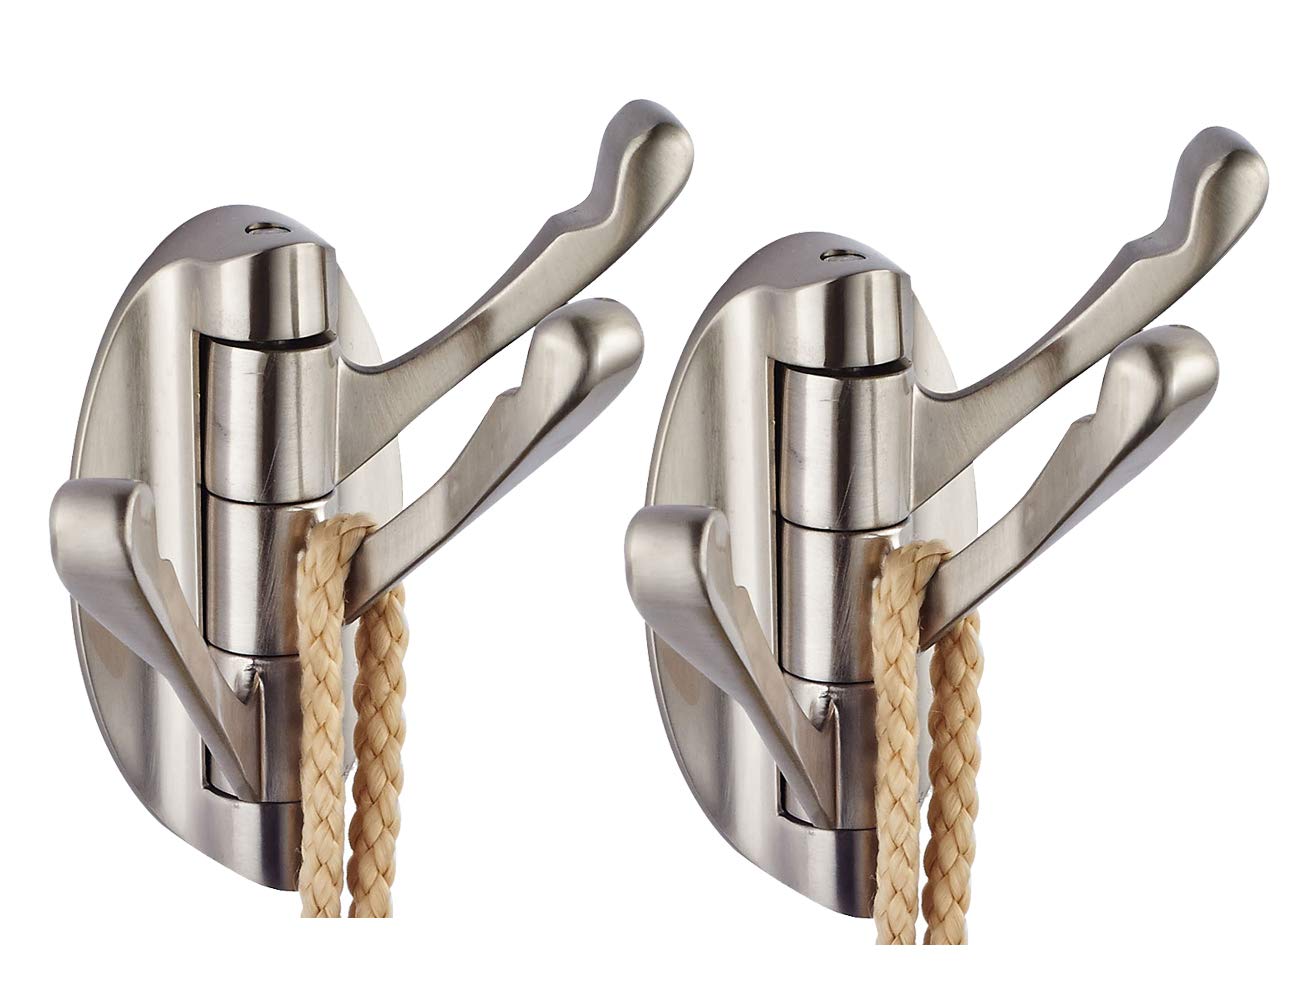 XOGOLO Swivel Hook 2 Pack for Heavy Duty Folding Swing Arm Triple Coat Hook with Multi Three Foldable Arms Towel/Clothes Hanger for Bathroom Kitchen Garage Wall Mount, Brushed Nickel